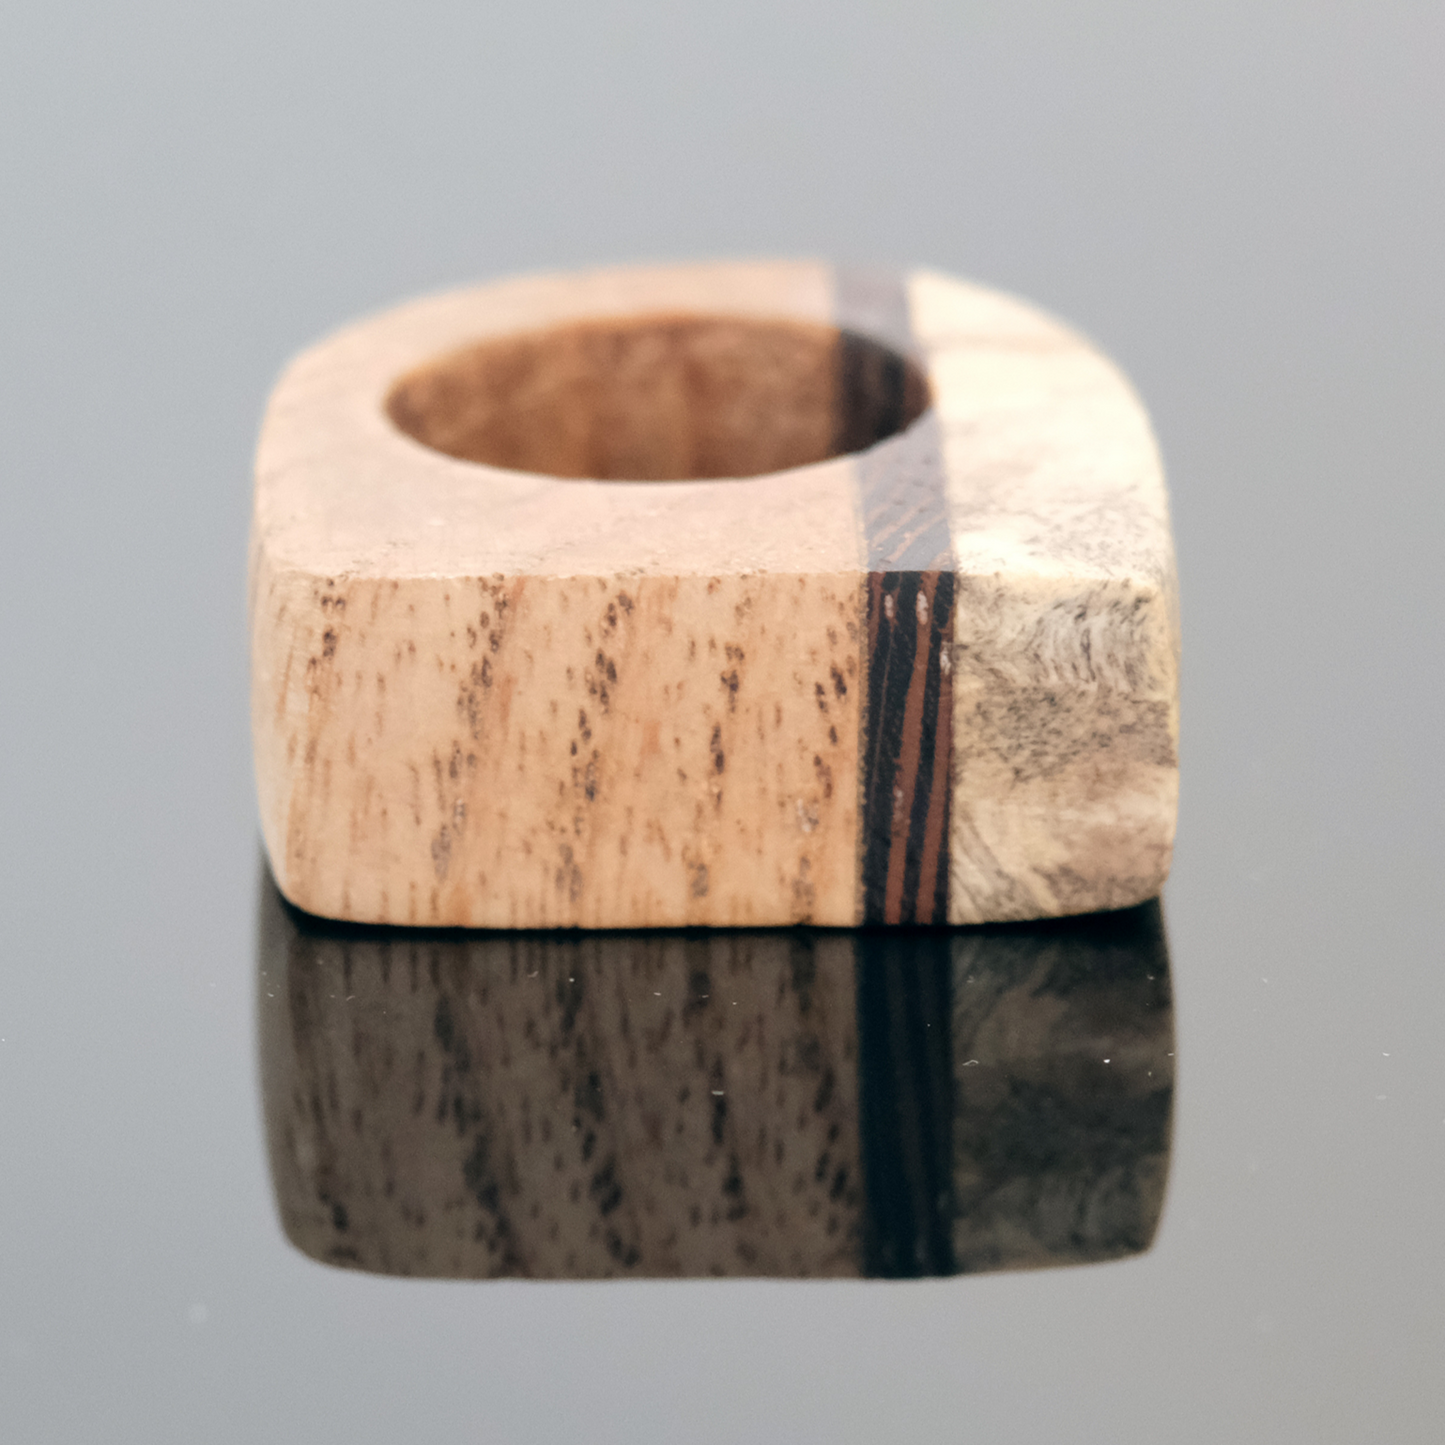 Tri-Grain - African Wenge, and Maple Wood Ring - by Nicholas Howlett